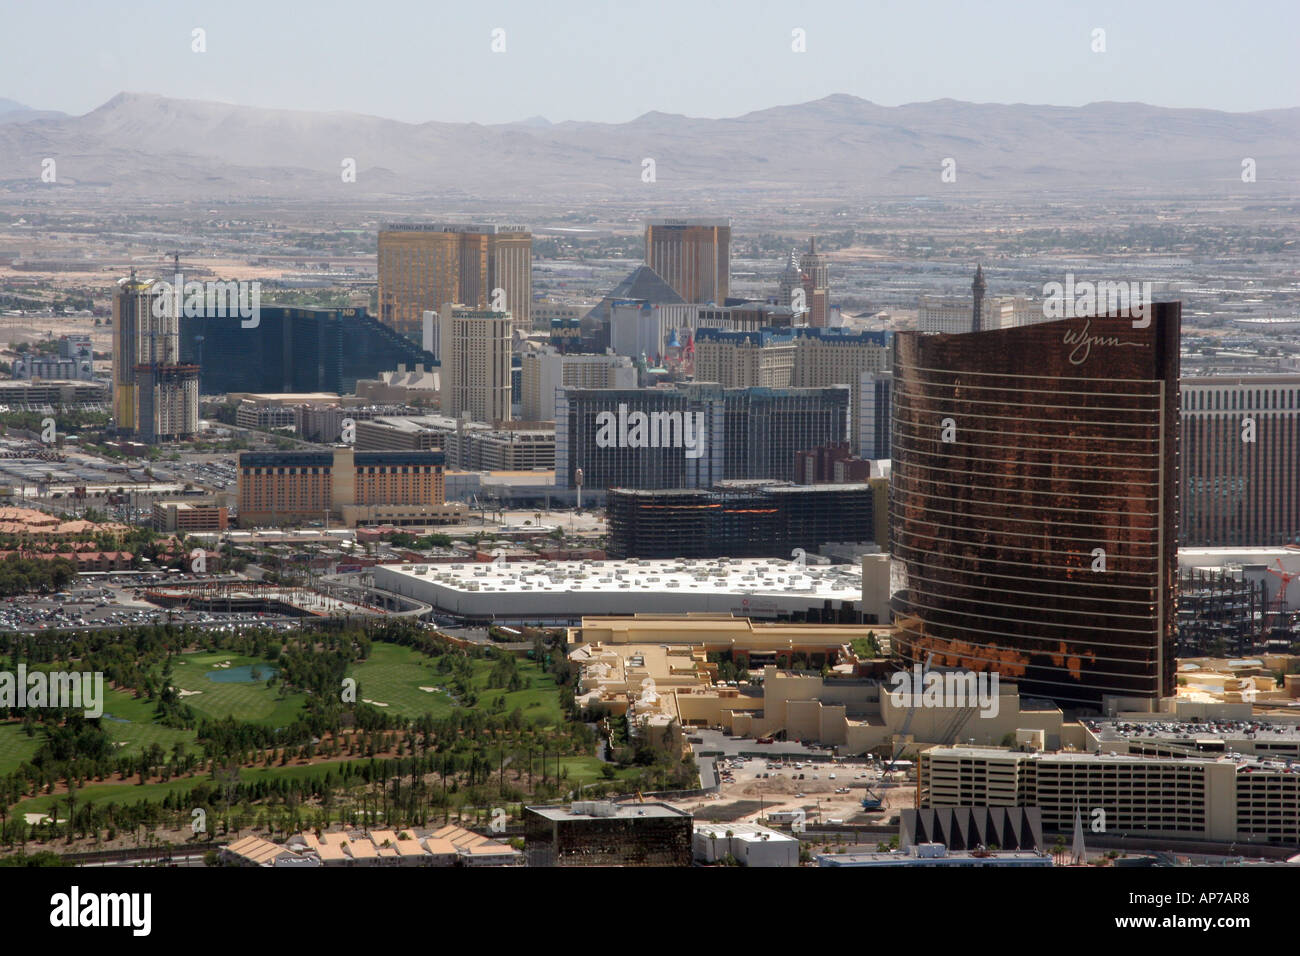 The Wynn Hotel And Golf Course At Las Vegas And The Strip From The for golfing las vegas strip intended for Dream